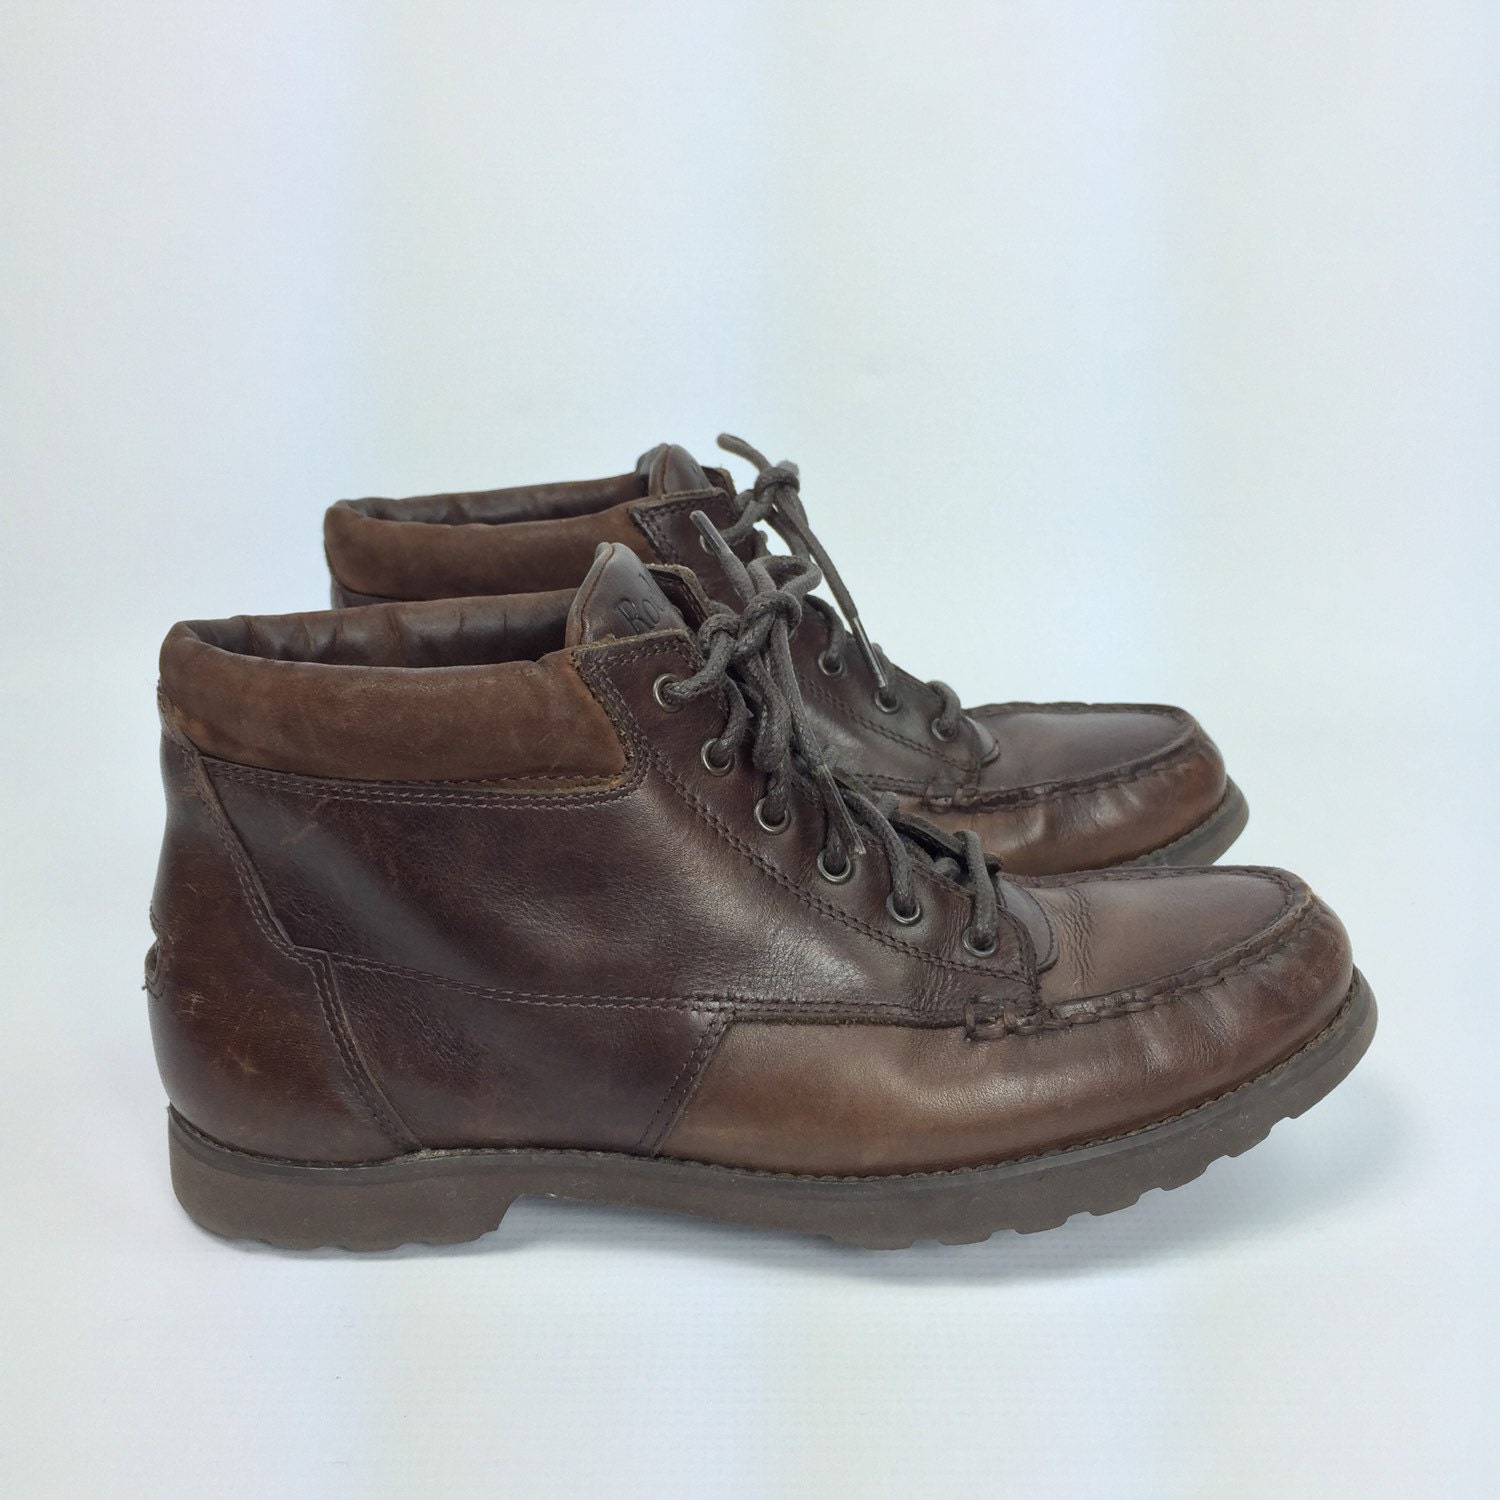 Size 8.5 Rockport Boots Vintage Leather Hiking Shoes